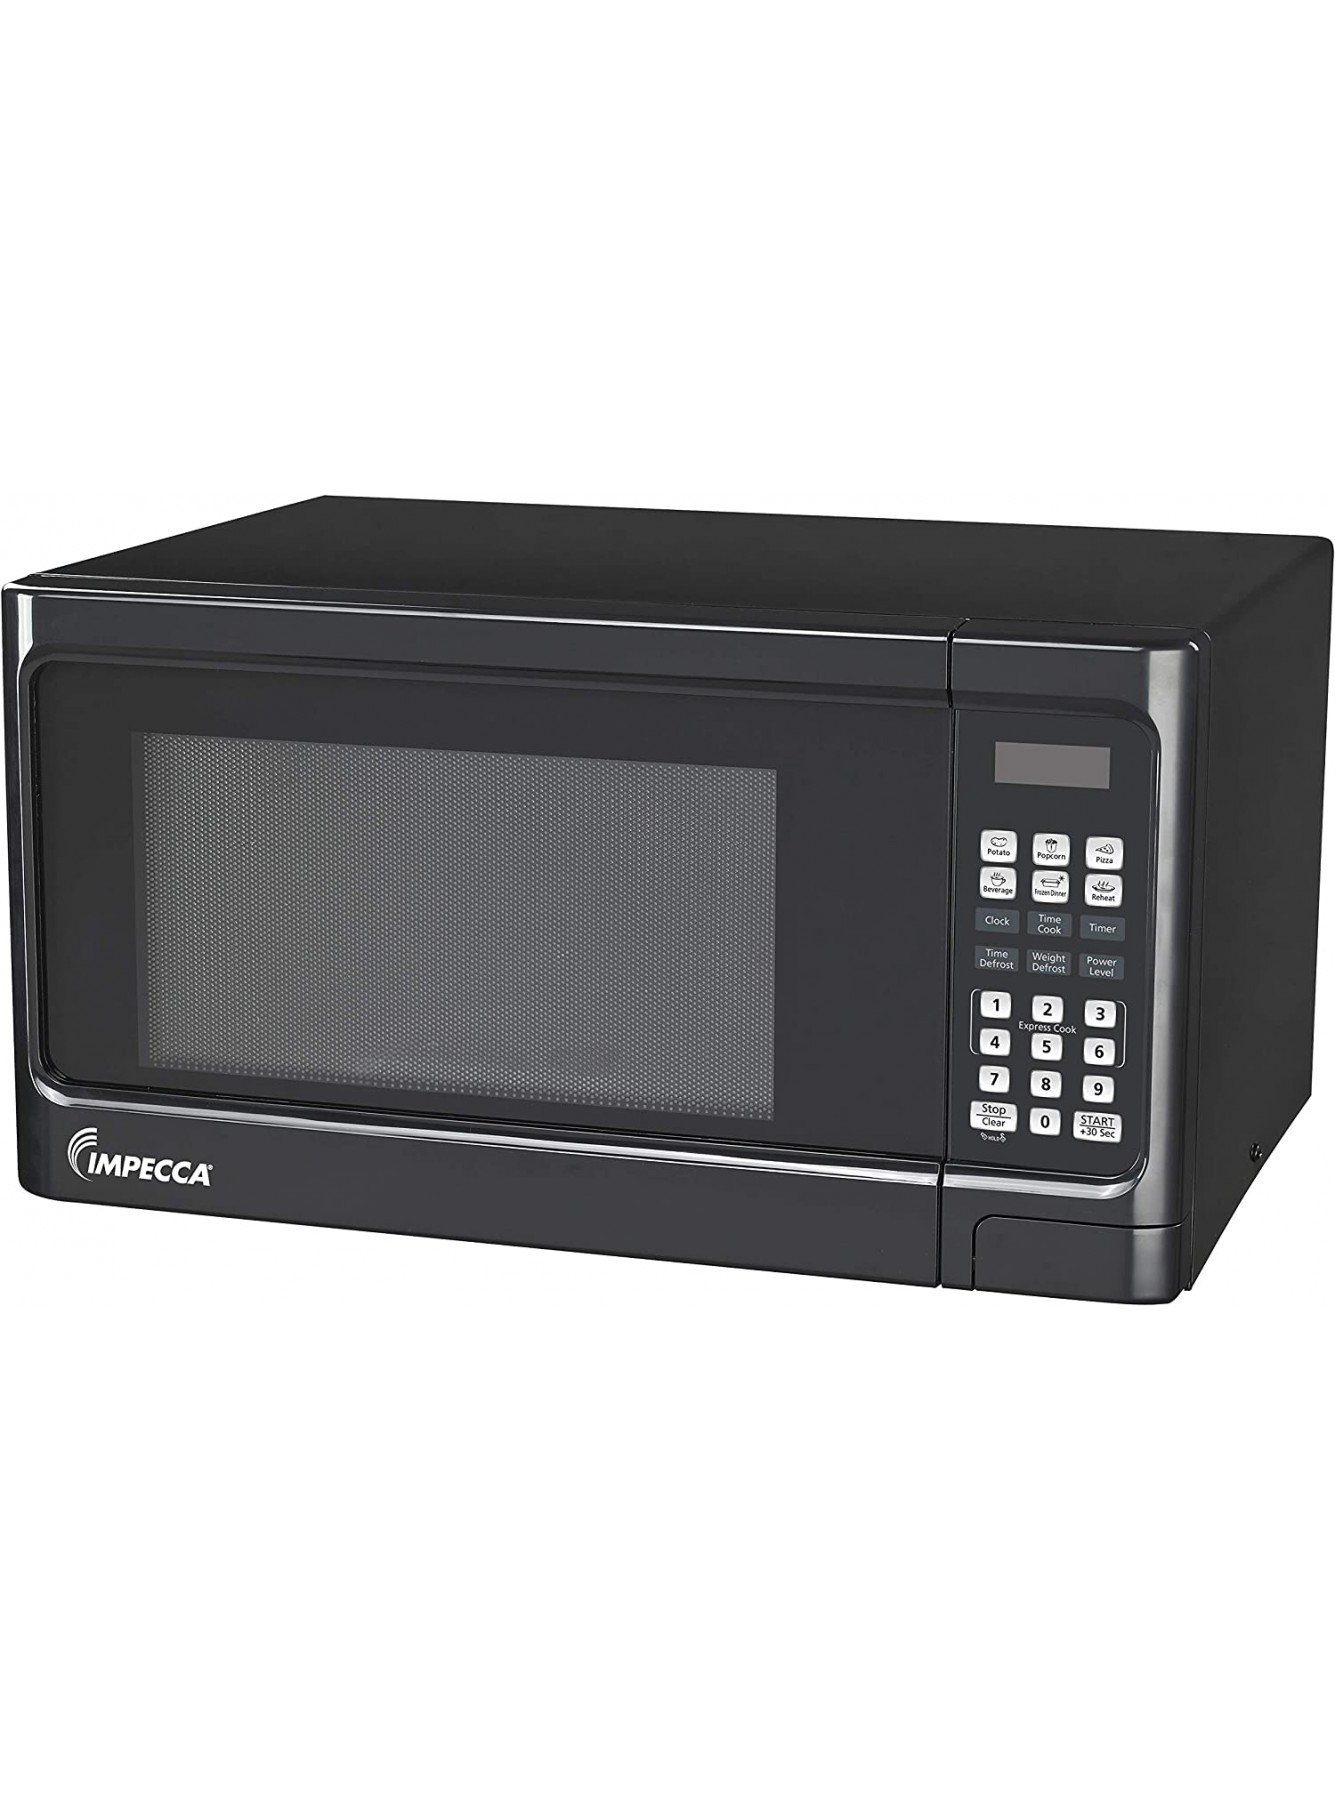 Impecca Countertop Microwave Oven 1.1 Cubic Feet 1000 Watts with 10 Power Levels and LED Digital Display Black B08FBKT2XF